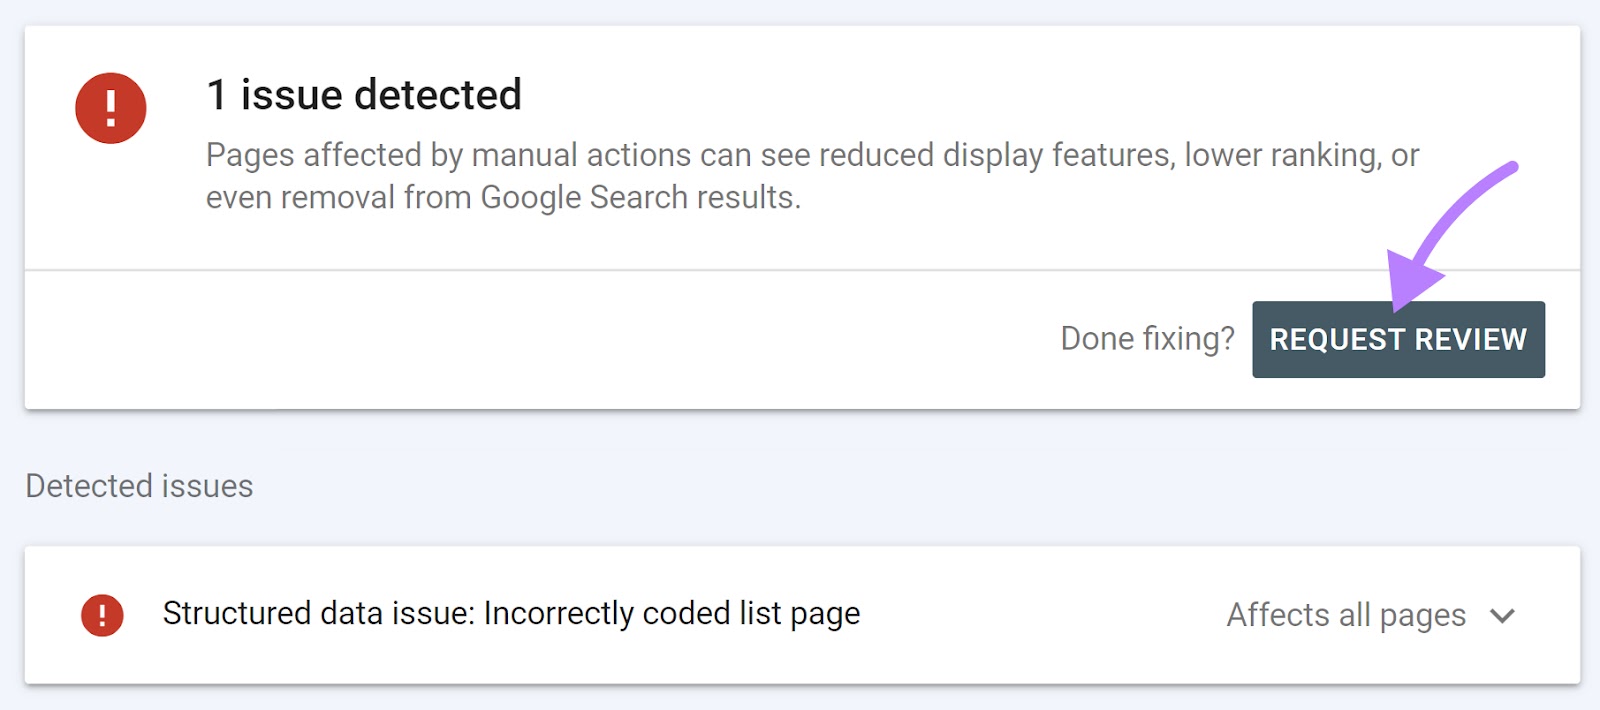 "REQUEST REVIEW" button selected in the “Manual Actions” report